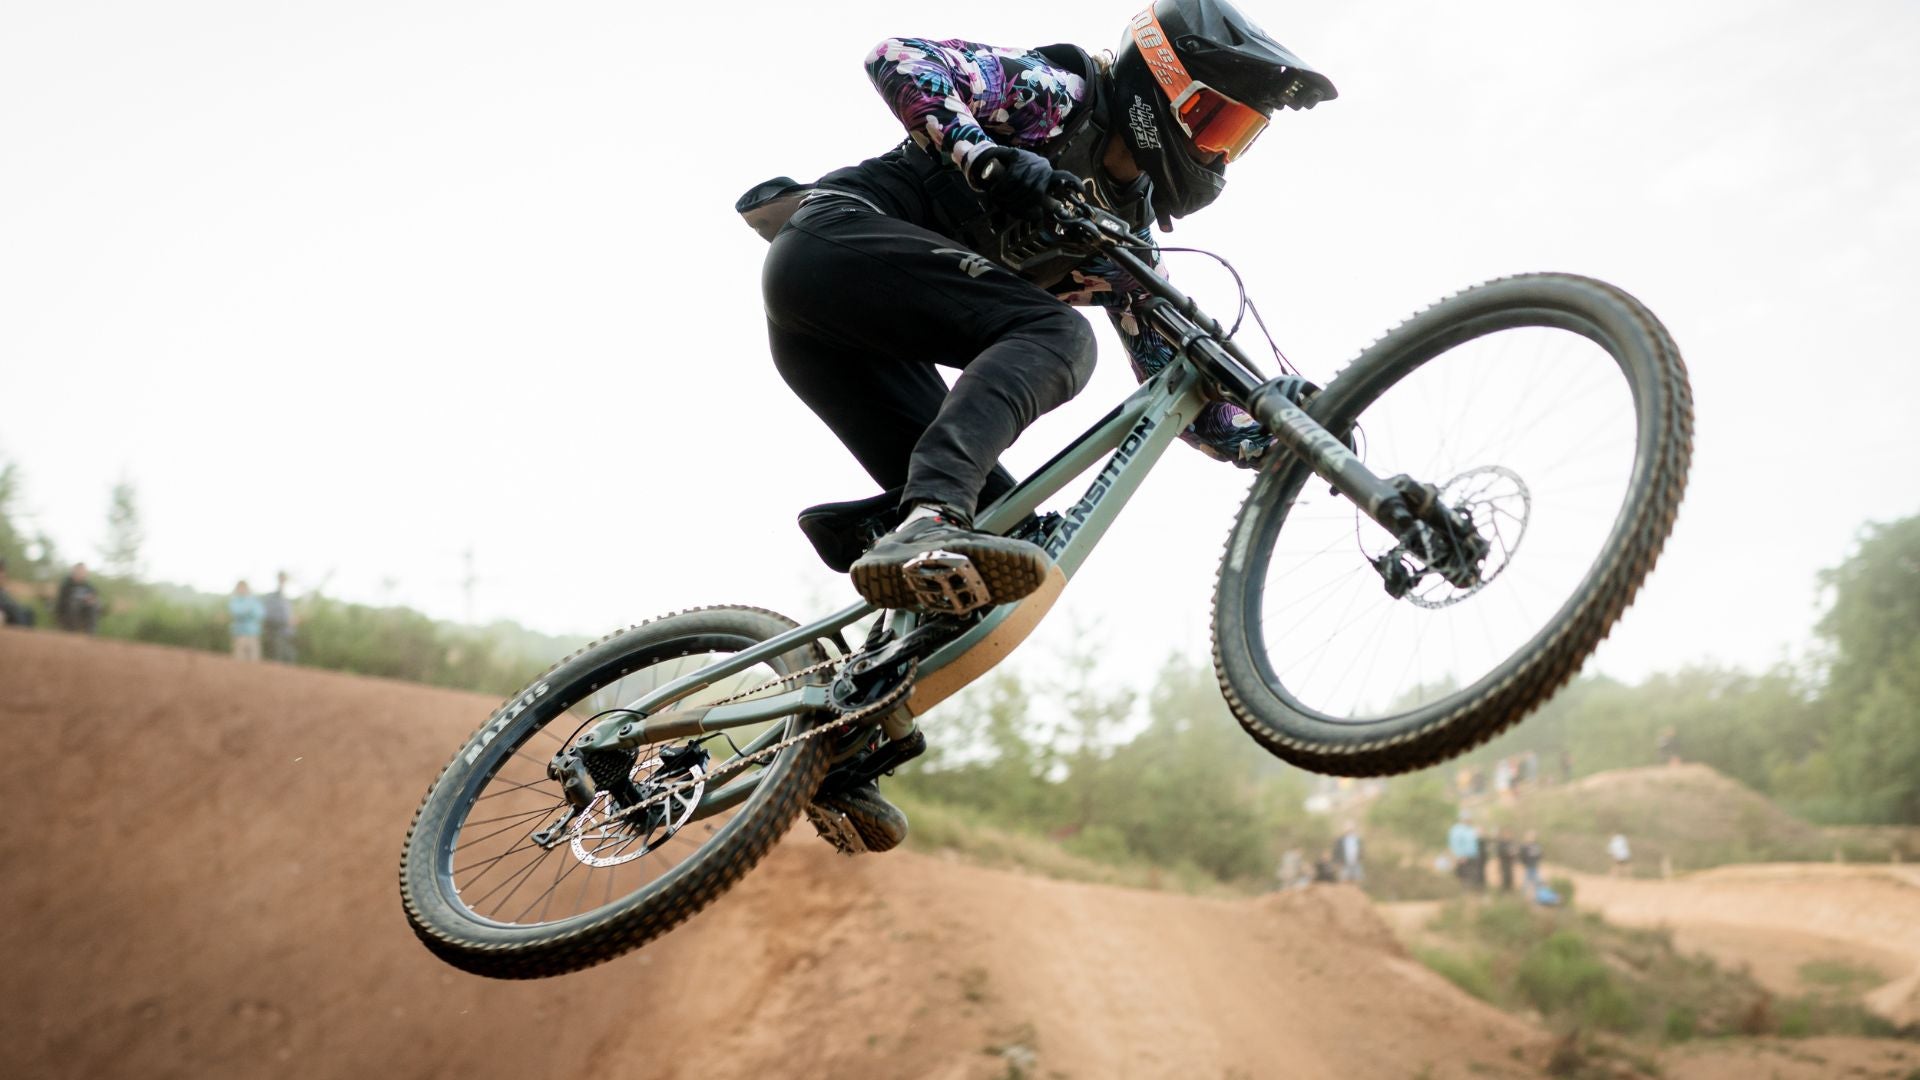 A mountain biker mid-air during a jump, wearing specialized MTB pants that demonstrate their flexibility and robustness, perfectly suited for high-adrenaline, airborne maneuvers